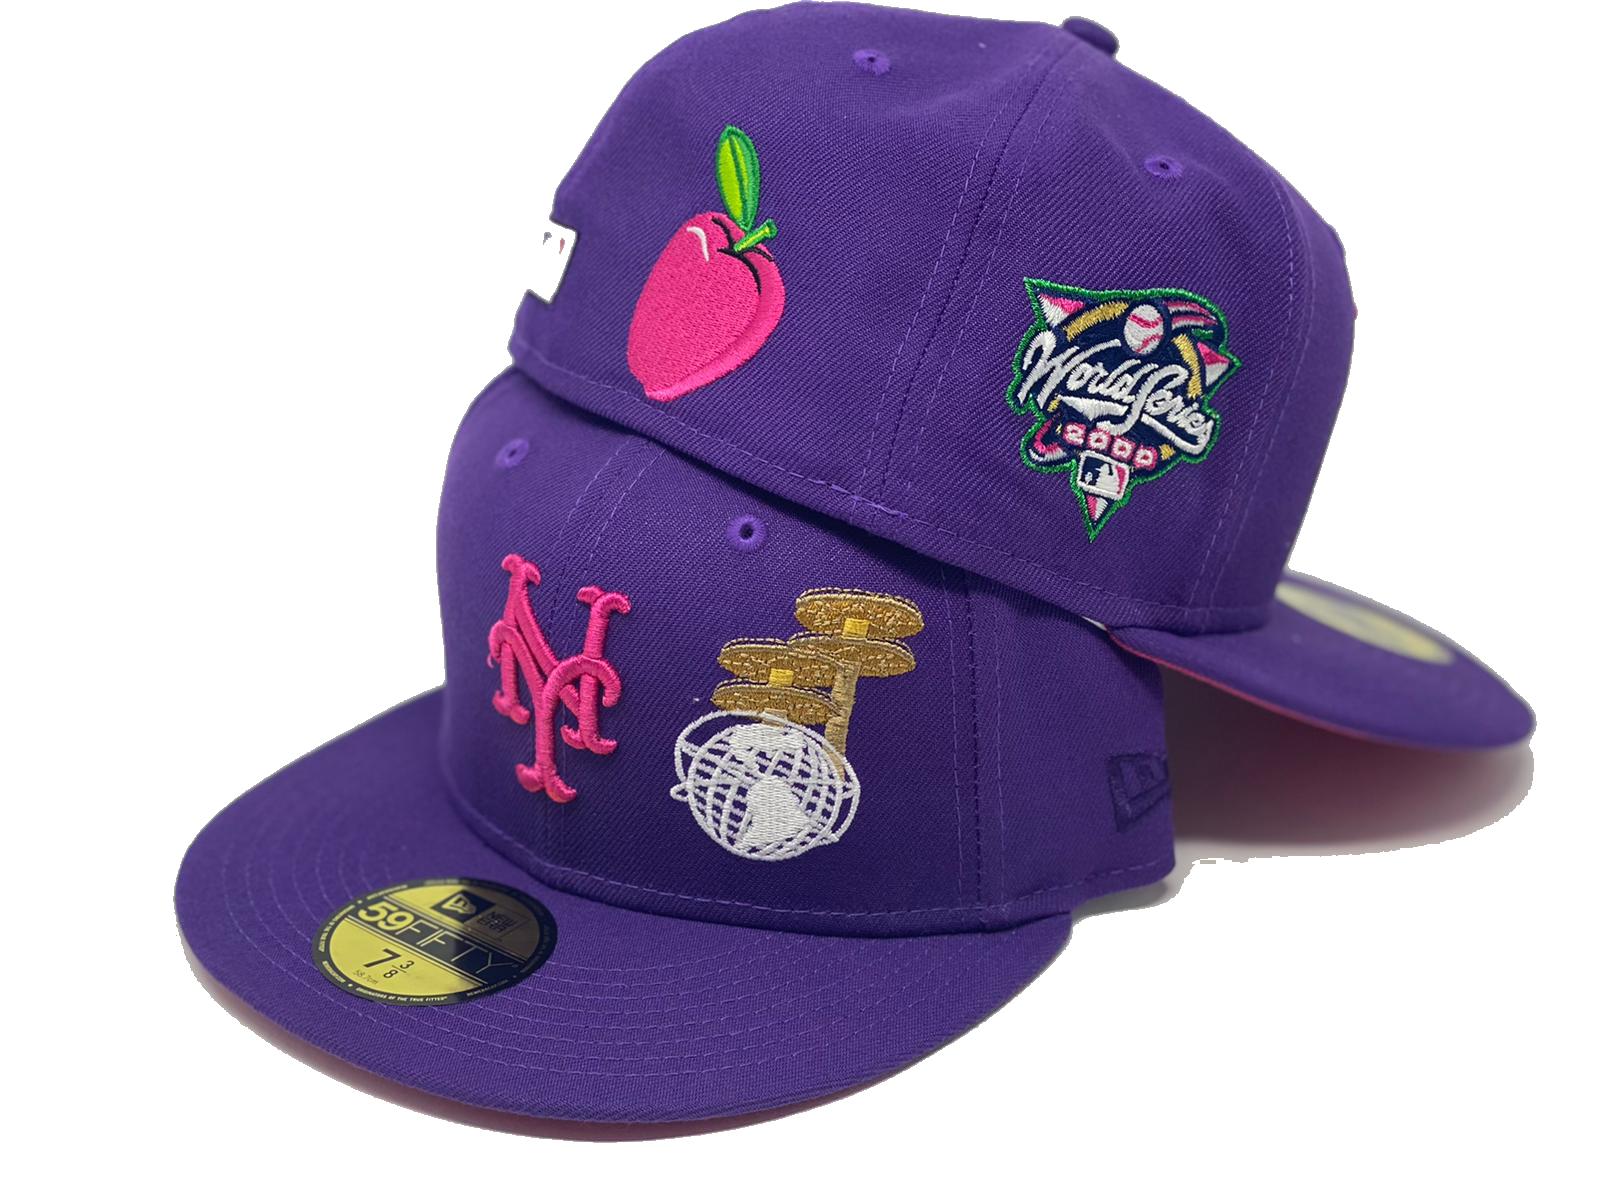 New Era 59FIFTY World Baseball Classic 2023 Mexico Alternate Fitted Hat Blue Pink